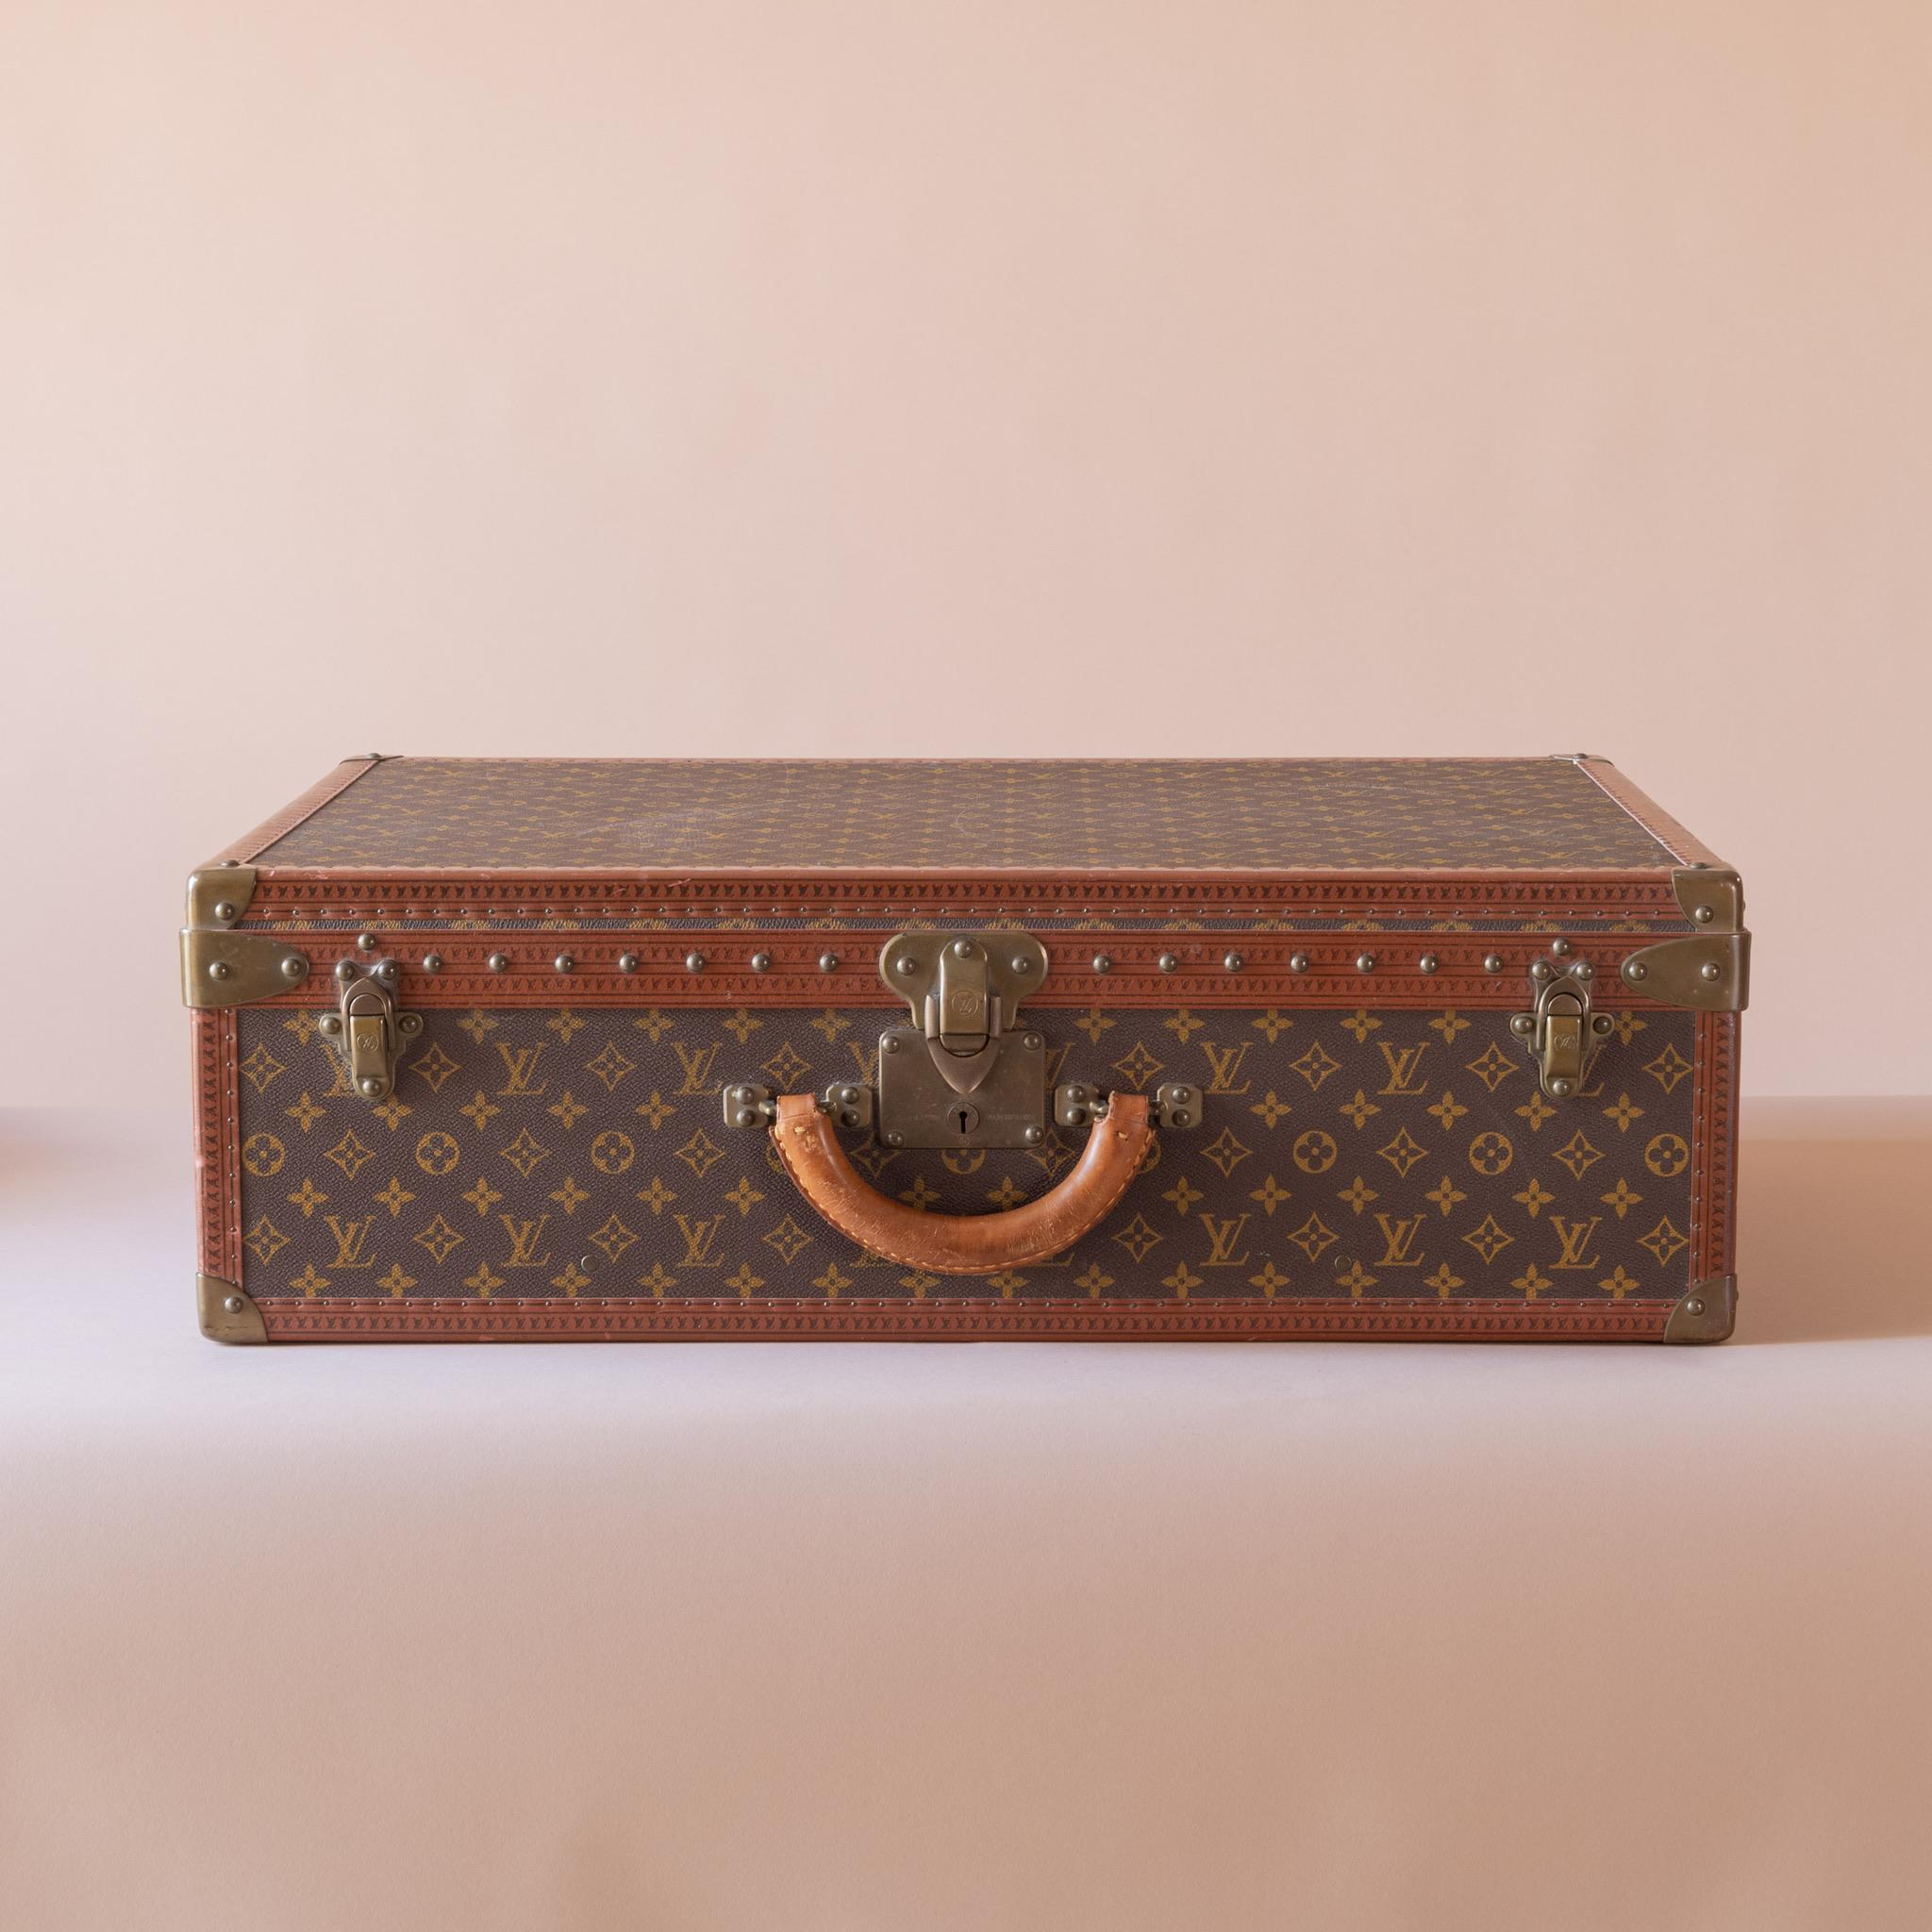 Louis Vuitton large ‘Alzer’ suitcase in LV monogram pattern coated canvas with edges trimmed in lozine and unpolished brass fittings. The lid of the case is secured by a central sprung catch with lock, plus two additional latches. Cream coated